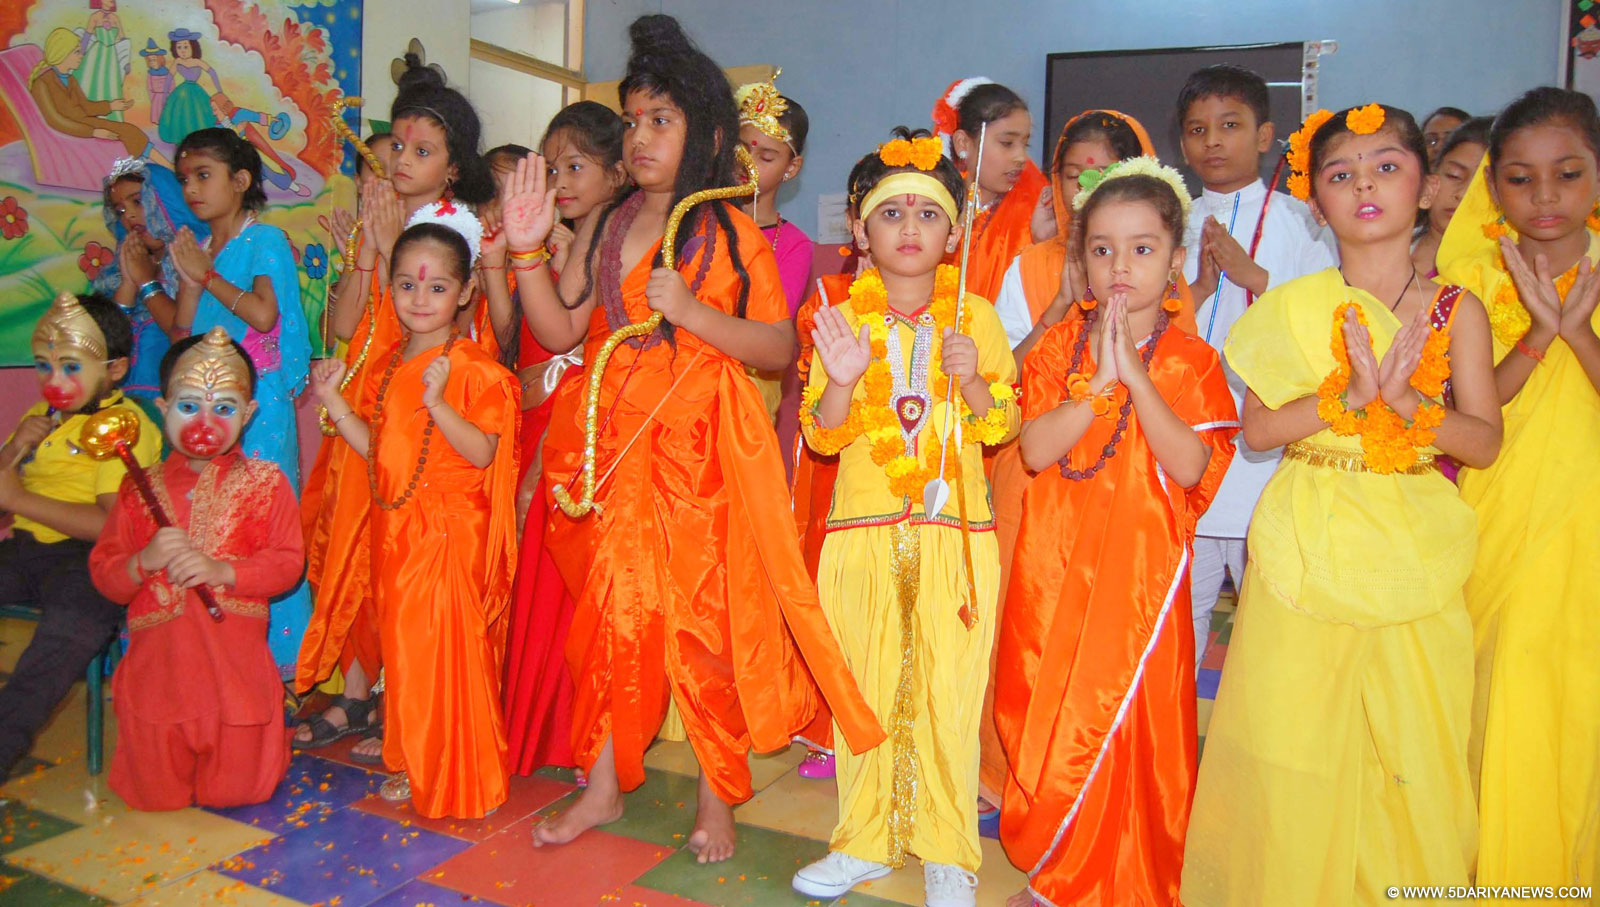 Ashmah International School celebrated Dussehra to commemorates the victory of Lord Rama